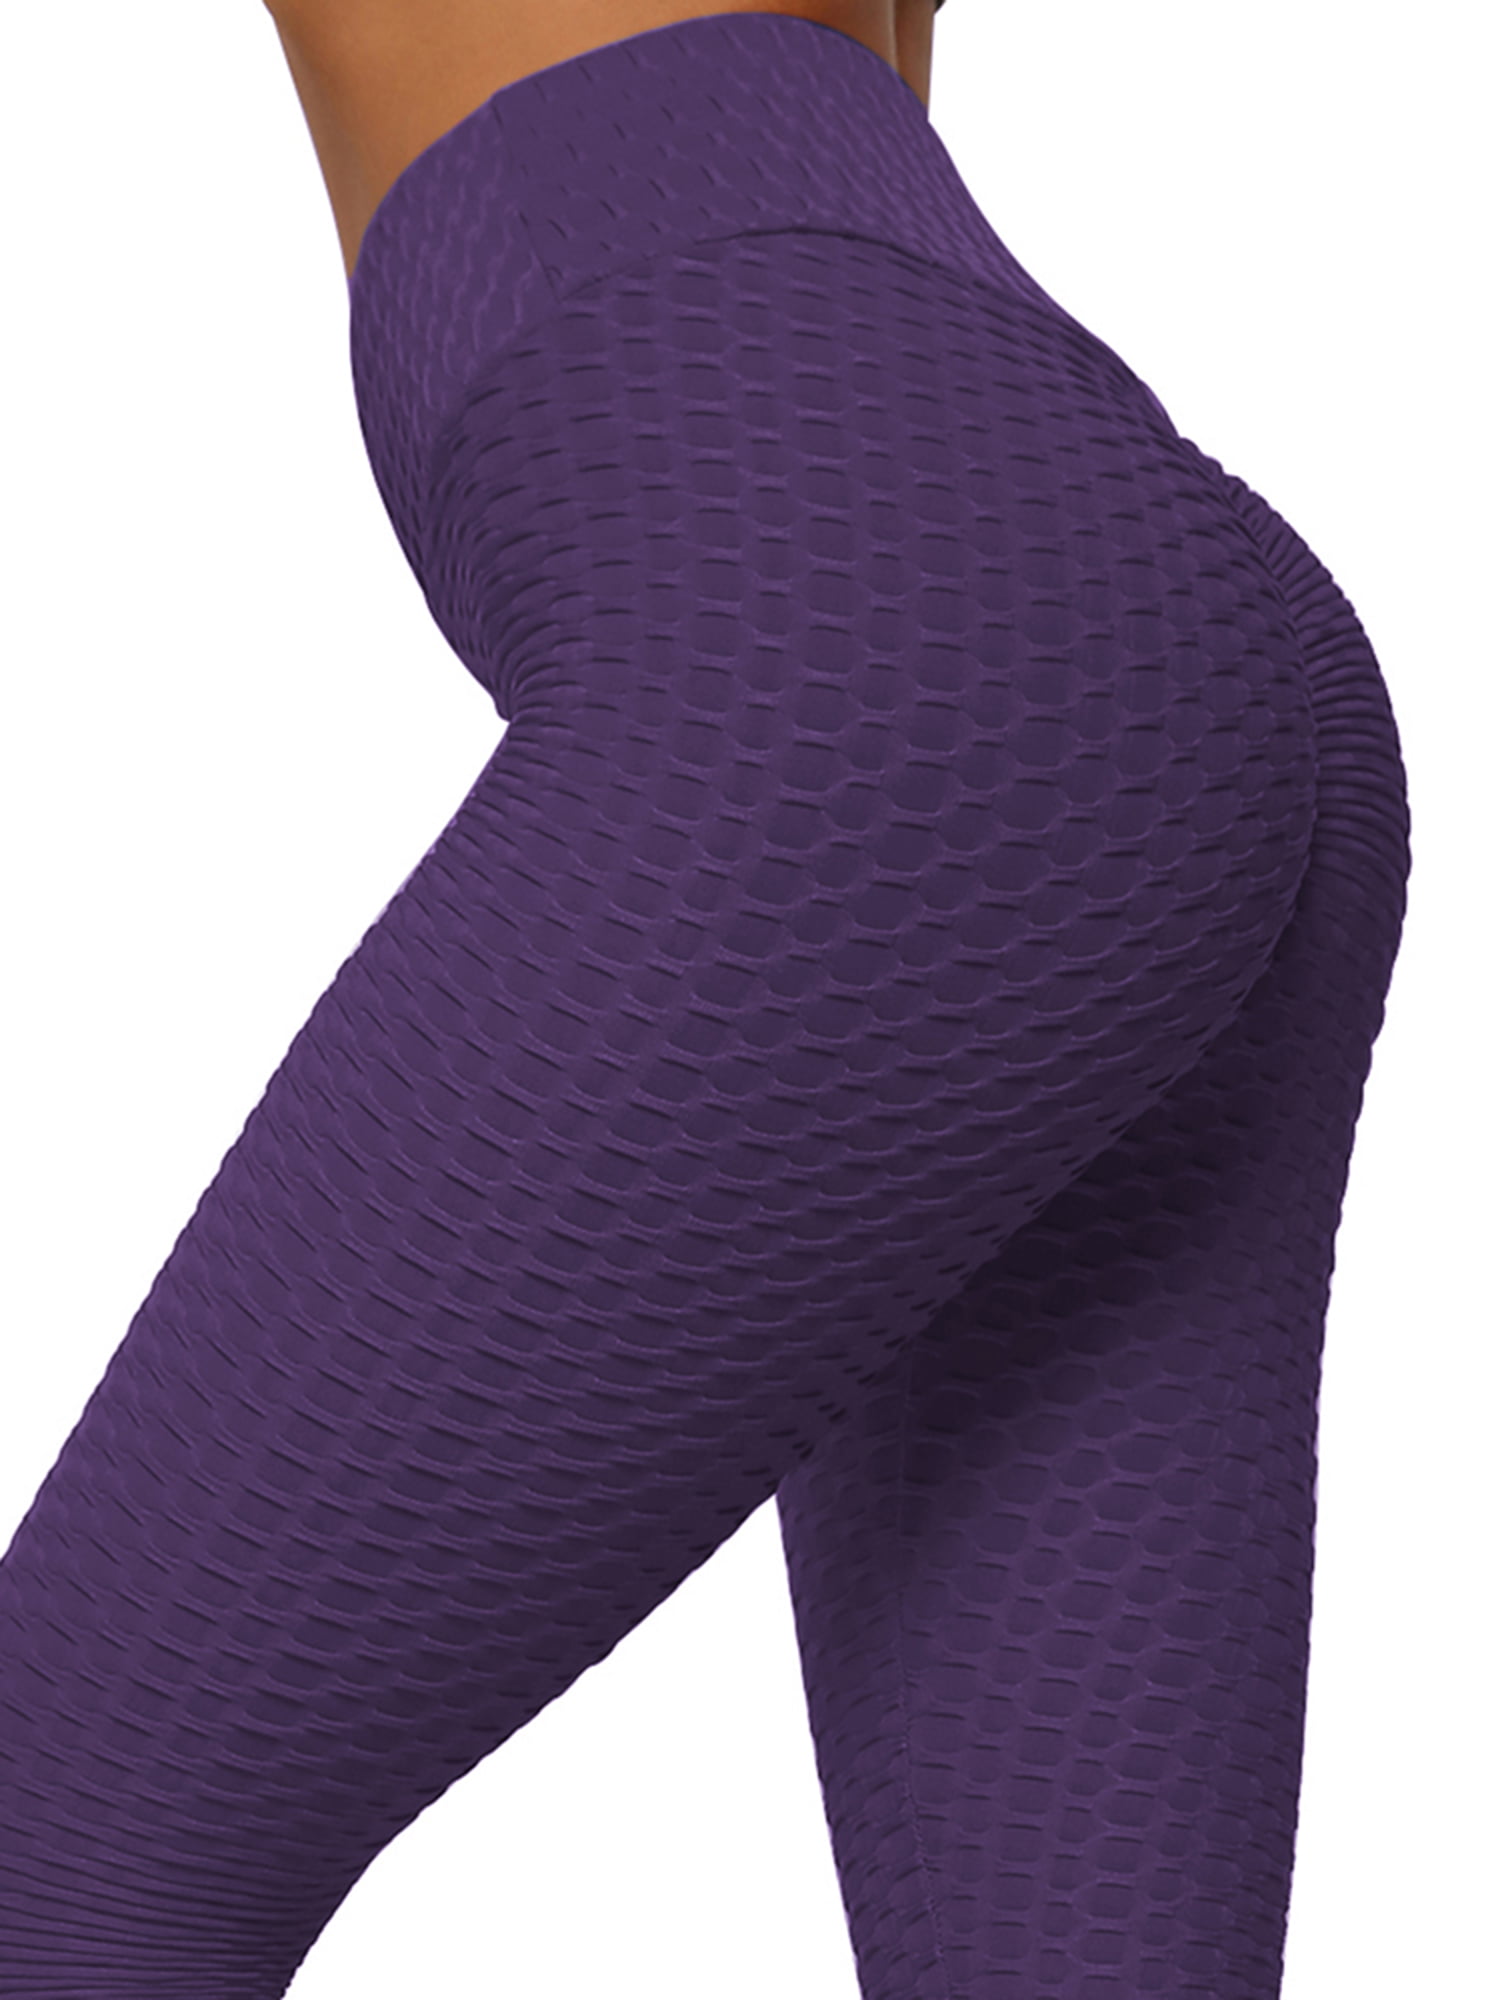 Tight Yoga Pants,Butt Lifting Anti Cellulite Leggings for Women High  Waisted Yoga Pants Workout Tummy Control Sport Tights 